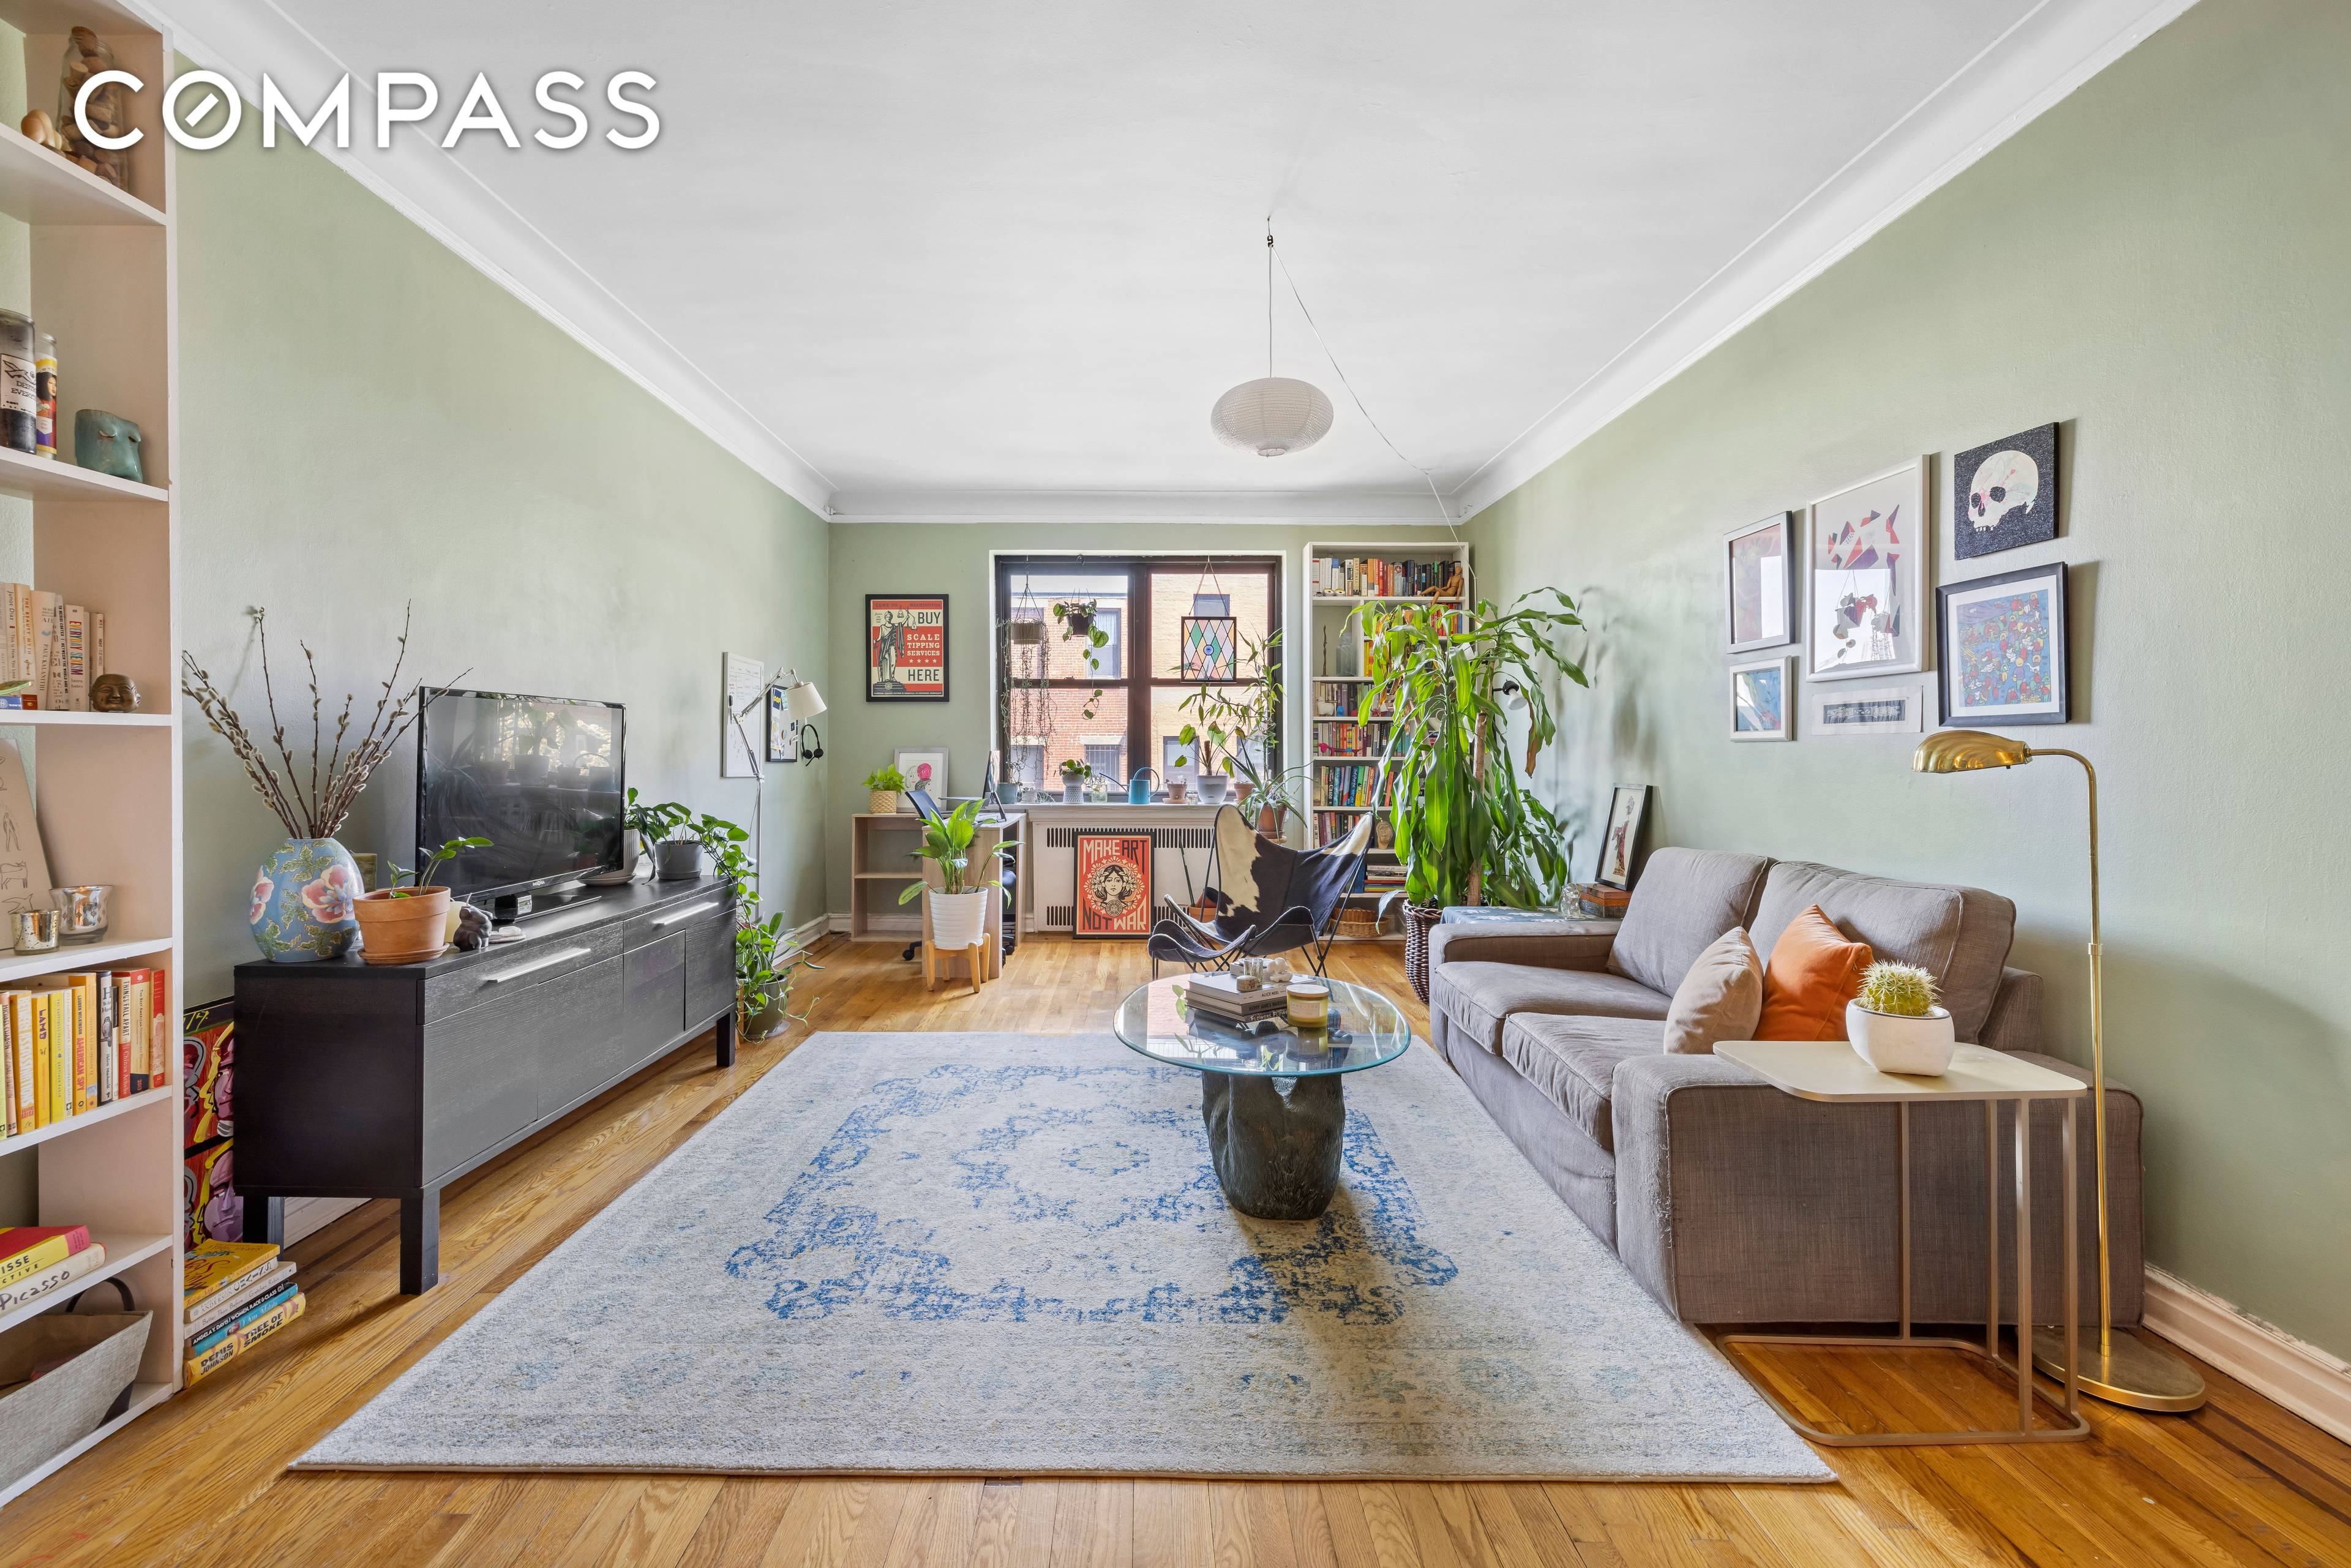 Rare opportunity to own this classic pre war corner two bedroom home located in one of Park Slope s most desirable pet friendly doorman co ops.